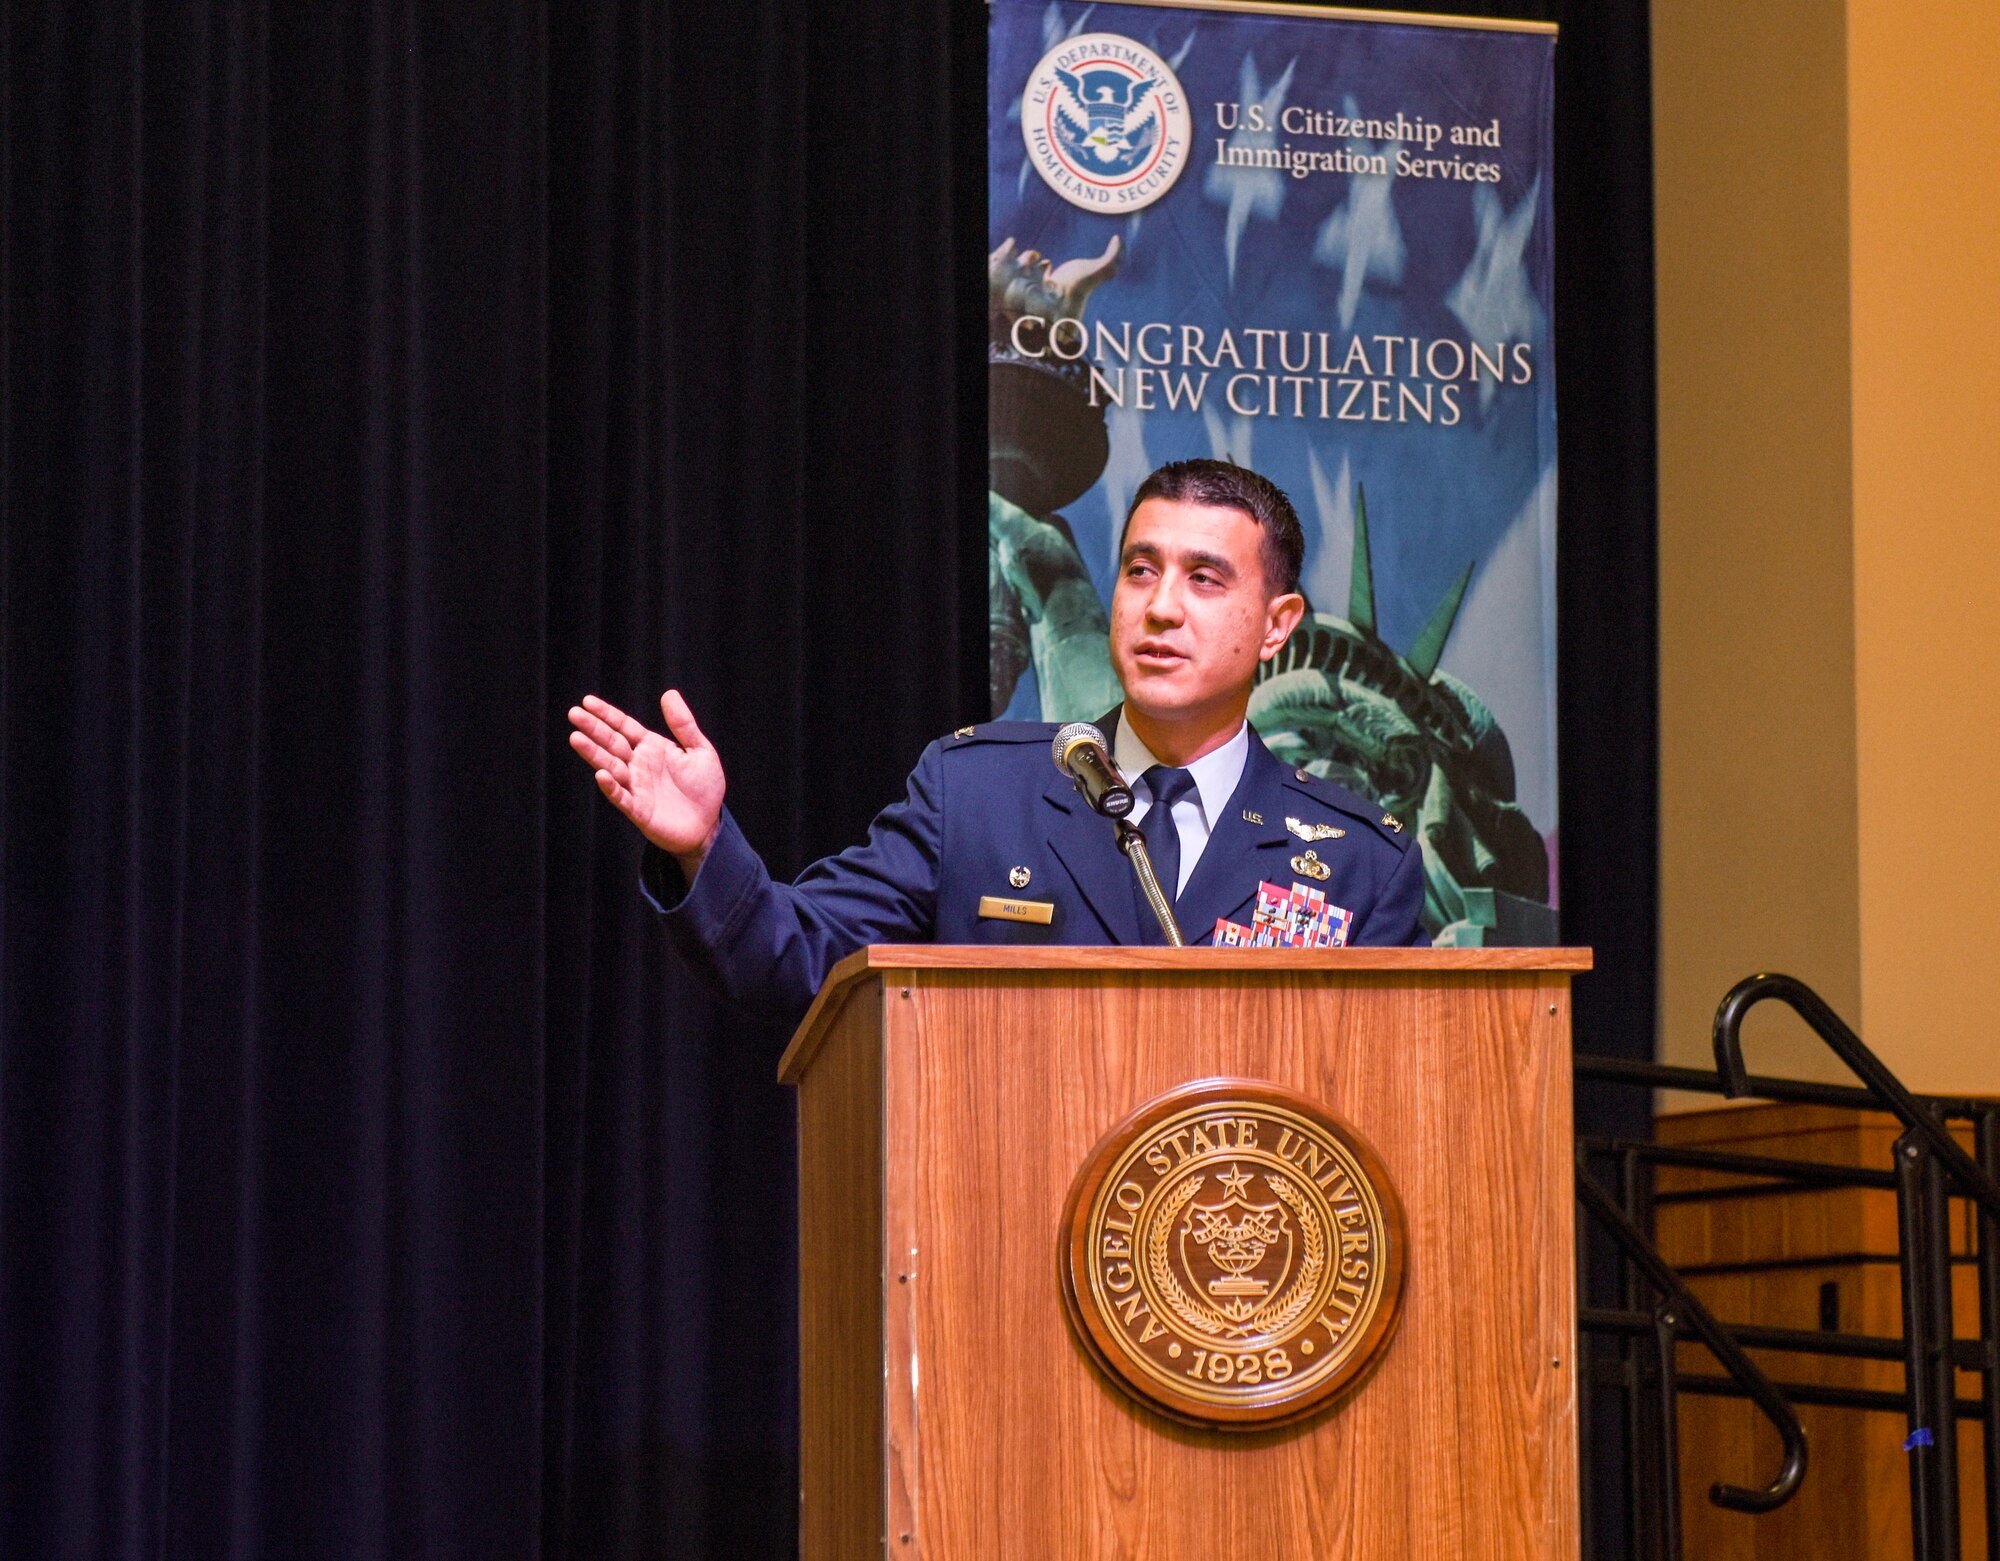 U.S. Air Force Col. Ricky Mills, 17th Training Wing commander, speaks during the naturalization ceremony held on Sept. 25, 2018 at the CJ Davidson Center on Angelo State University, San Angelo, Texas. Mills shared stories about how his mother was naturalized in 1974 in San Francisco when he was only two-years-old. (U.S. Air Force photo by Aryn Lockhart/Released).